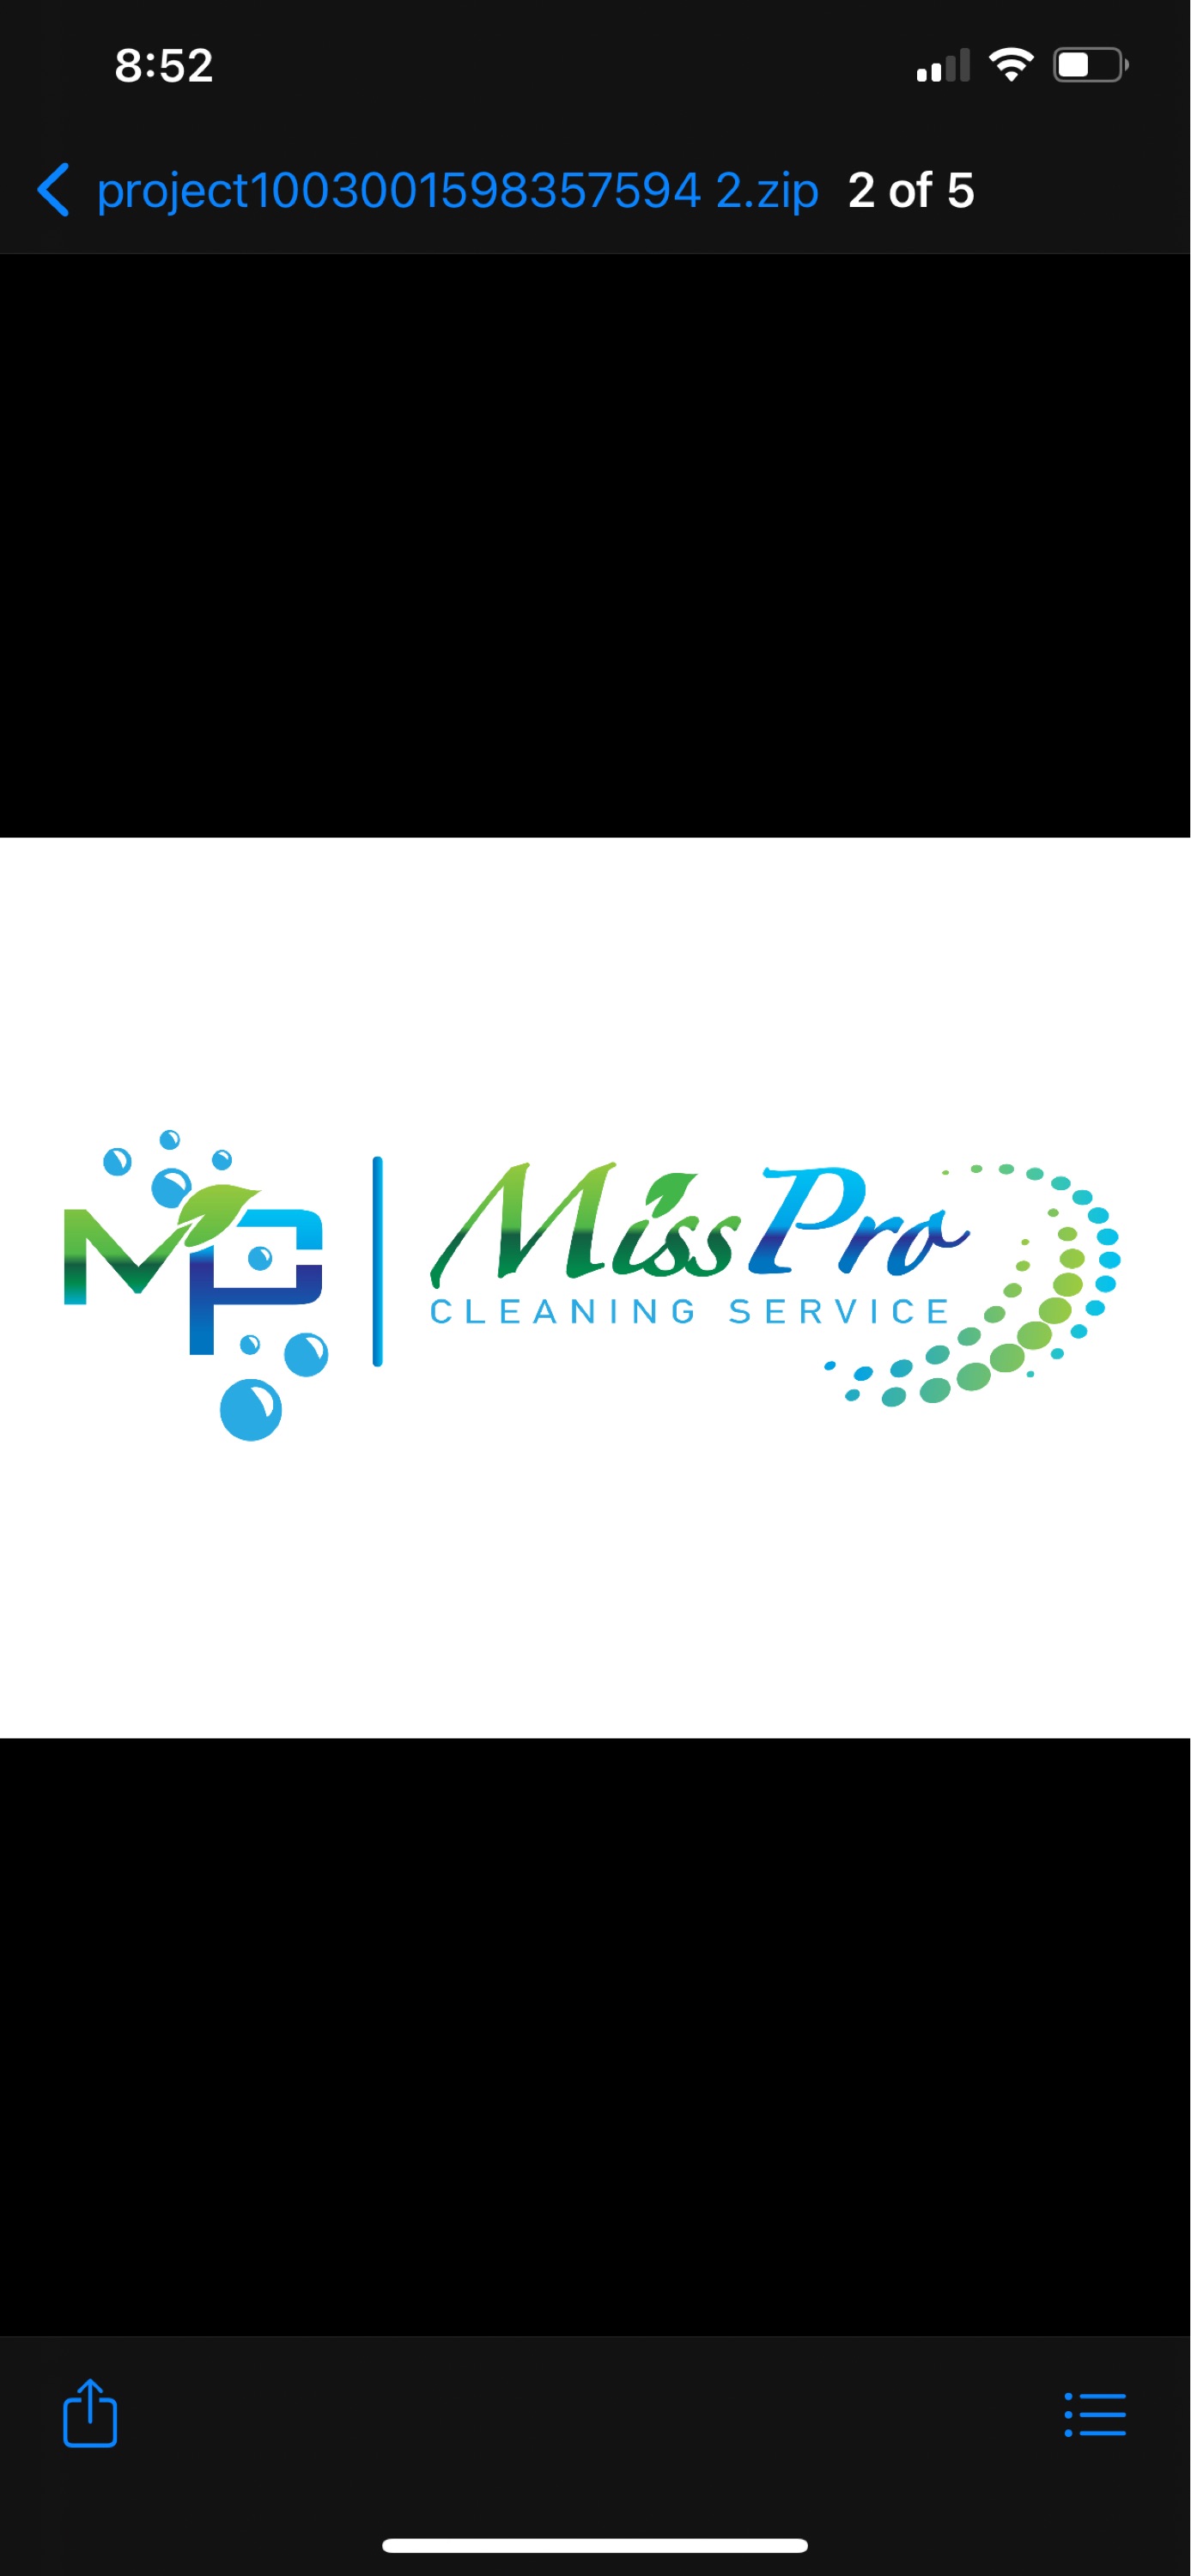 Miss Pro Cleaning Service Logo